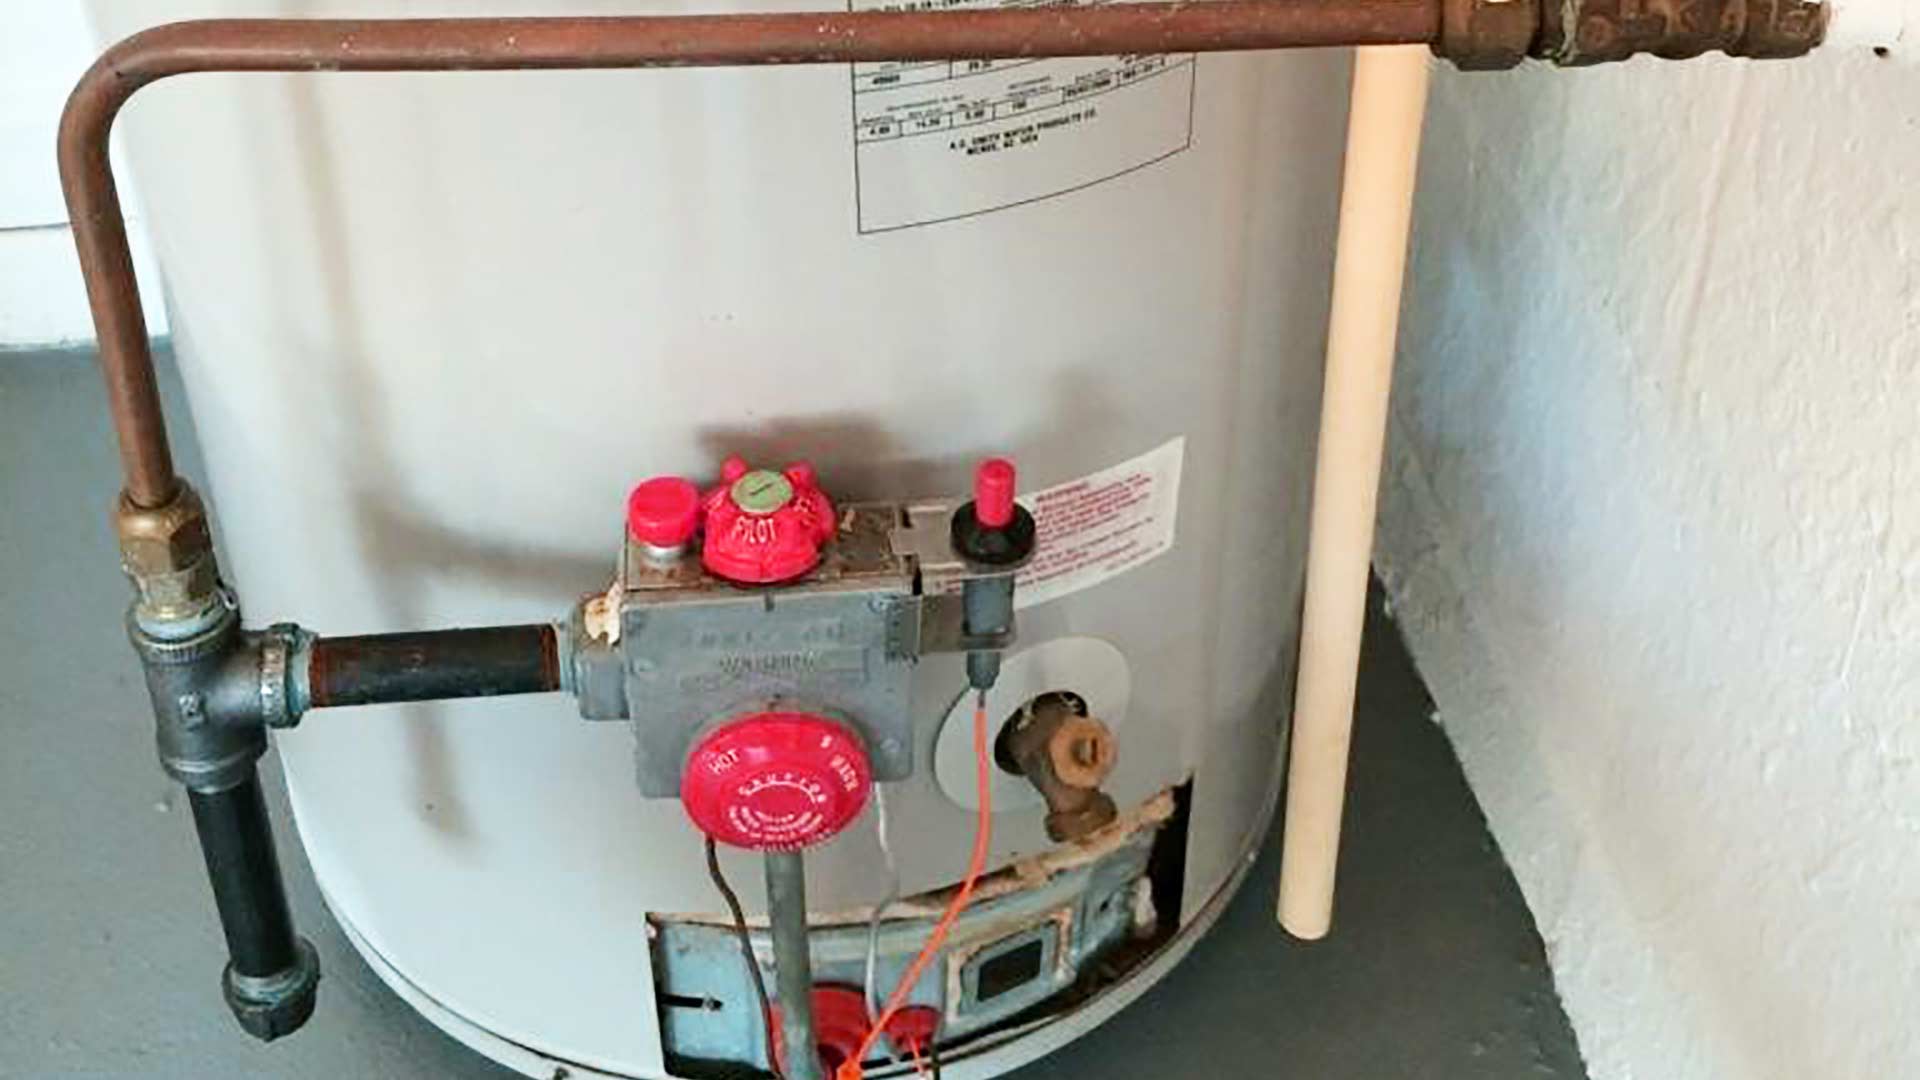 A water heater tank for a home in Winter Haven, FL.